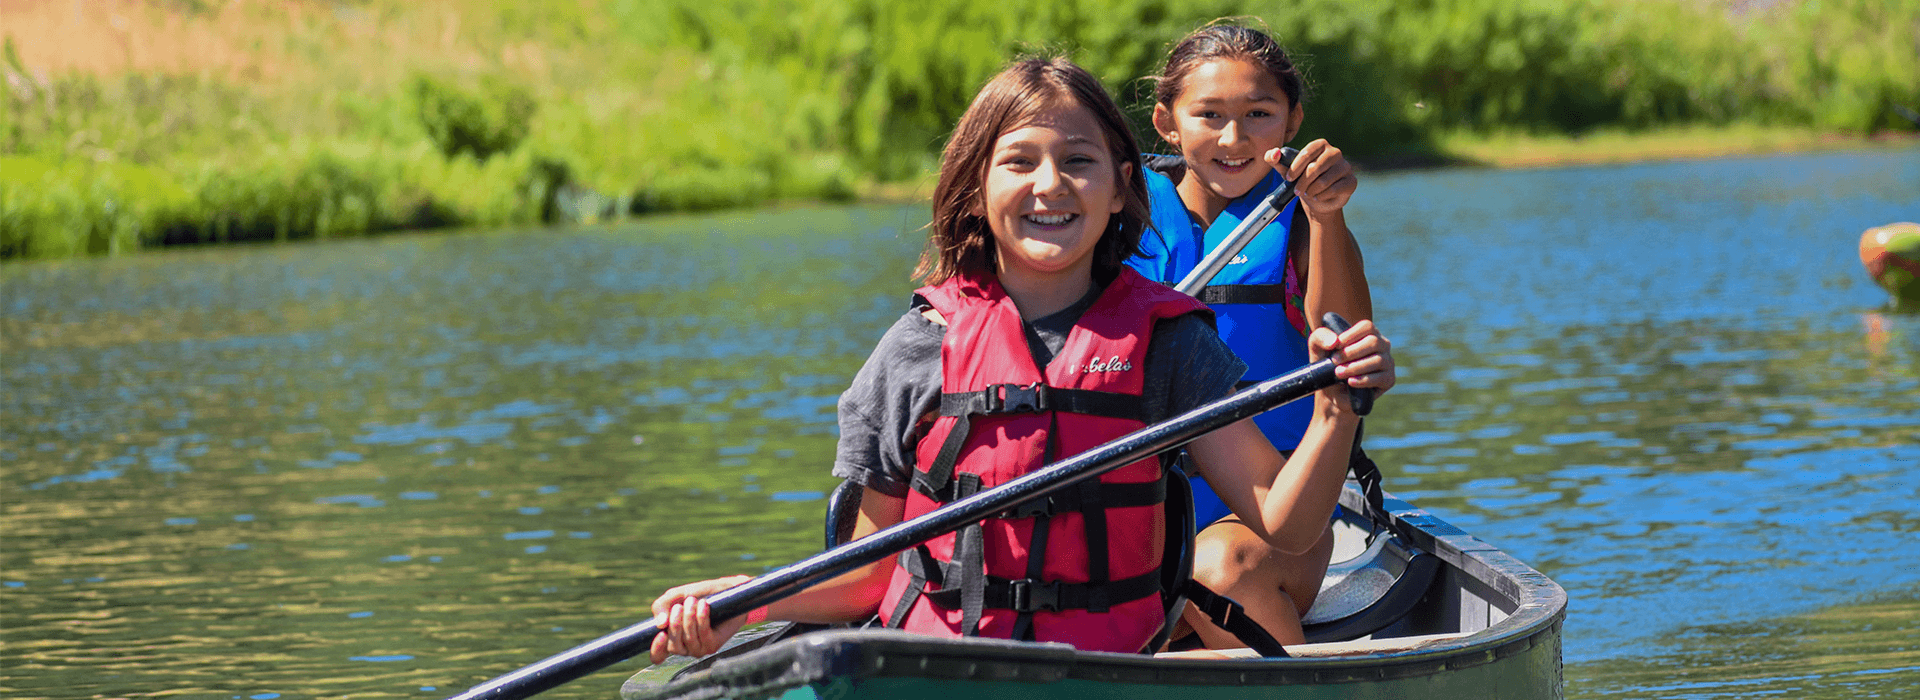 Two girls smiling in a canoe